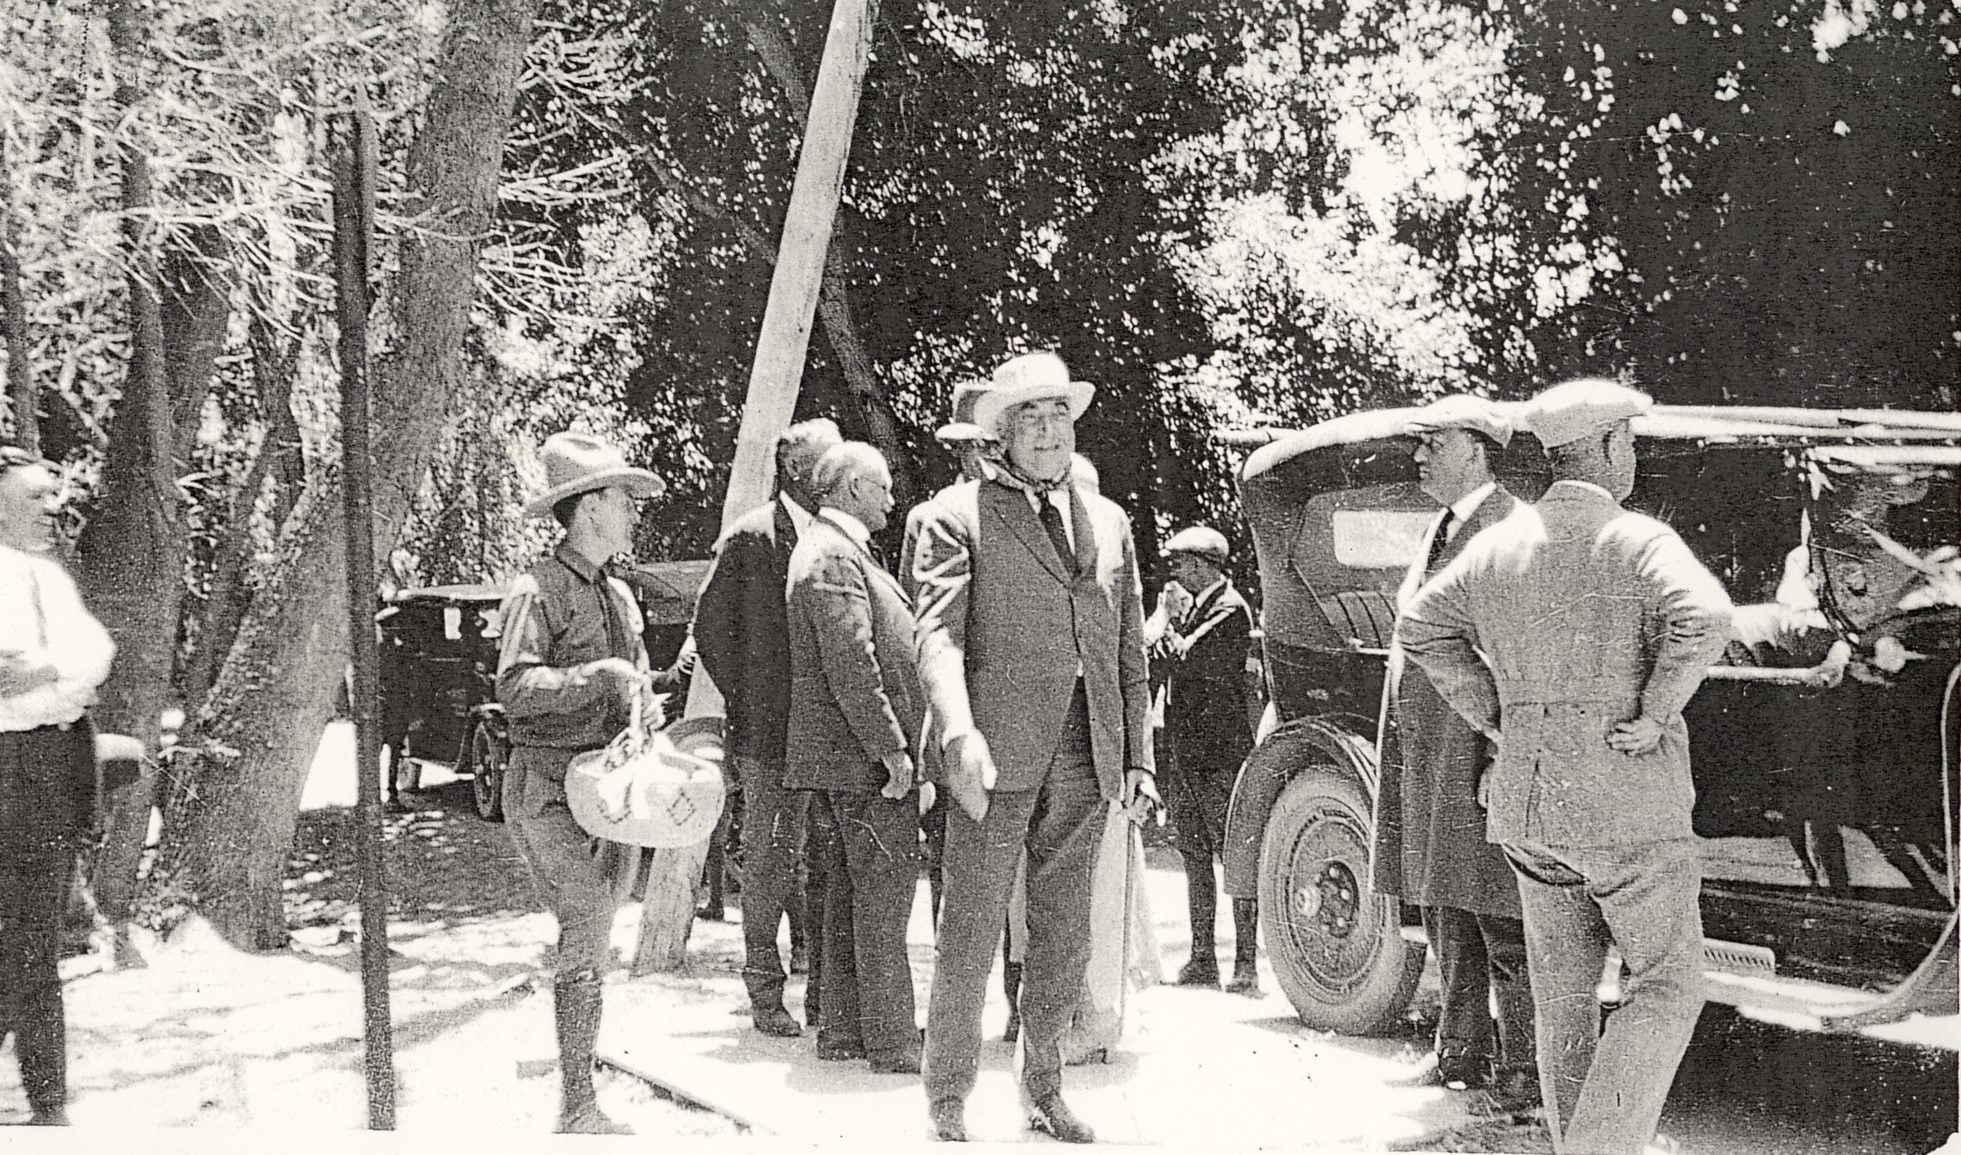 President Harding and his entourage arriving in Zion National Park